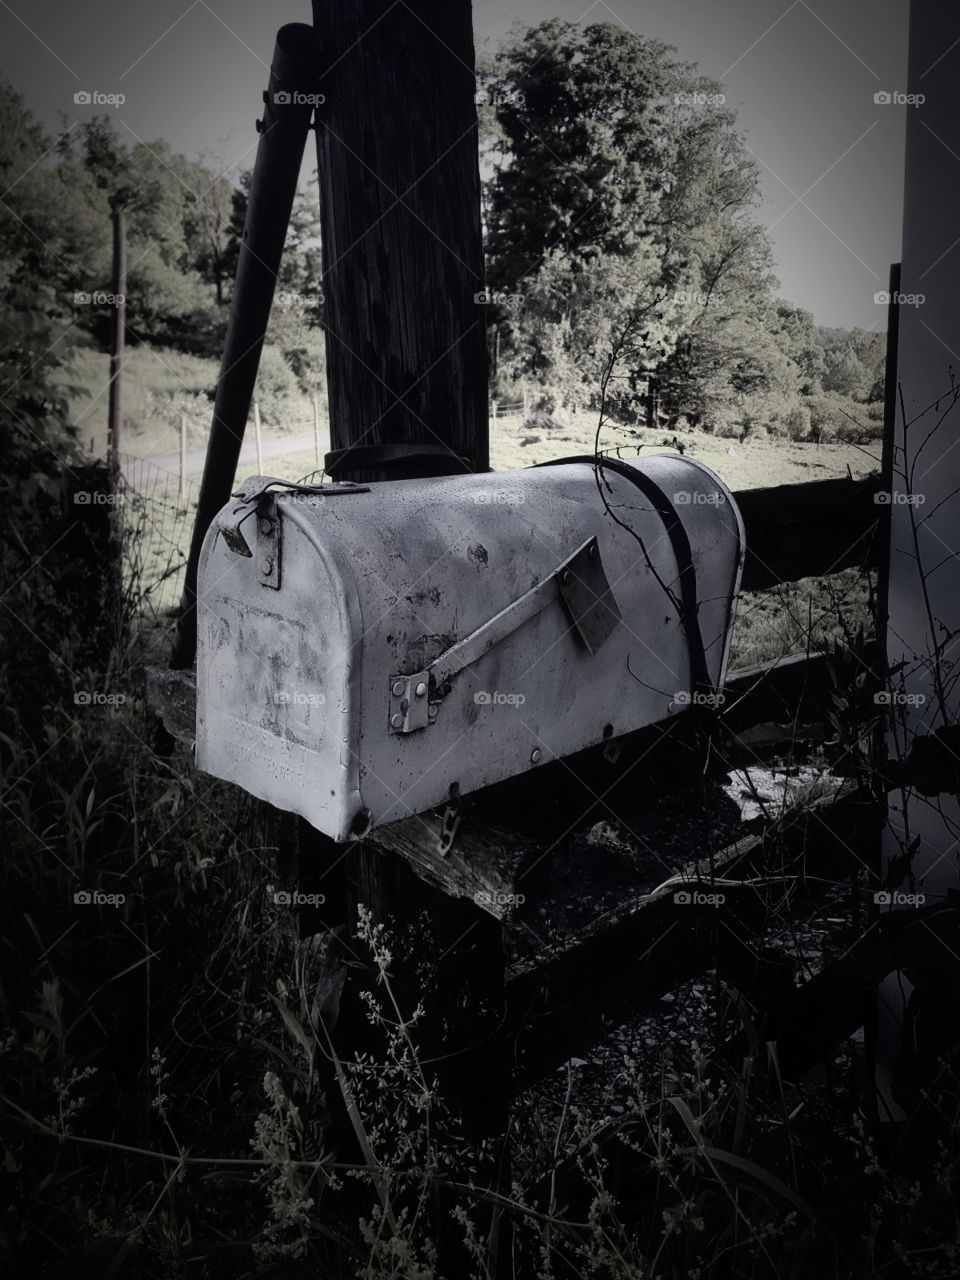 mailbox in the rough